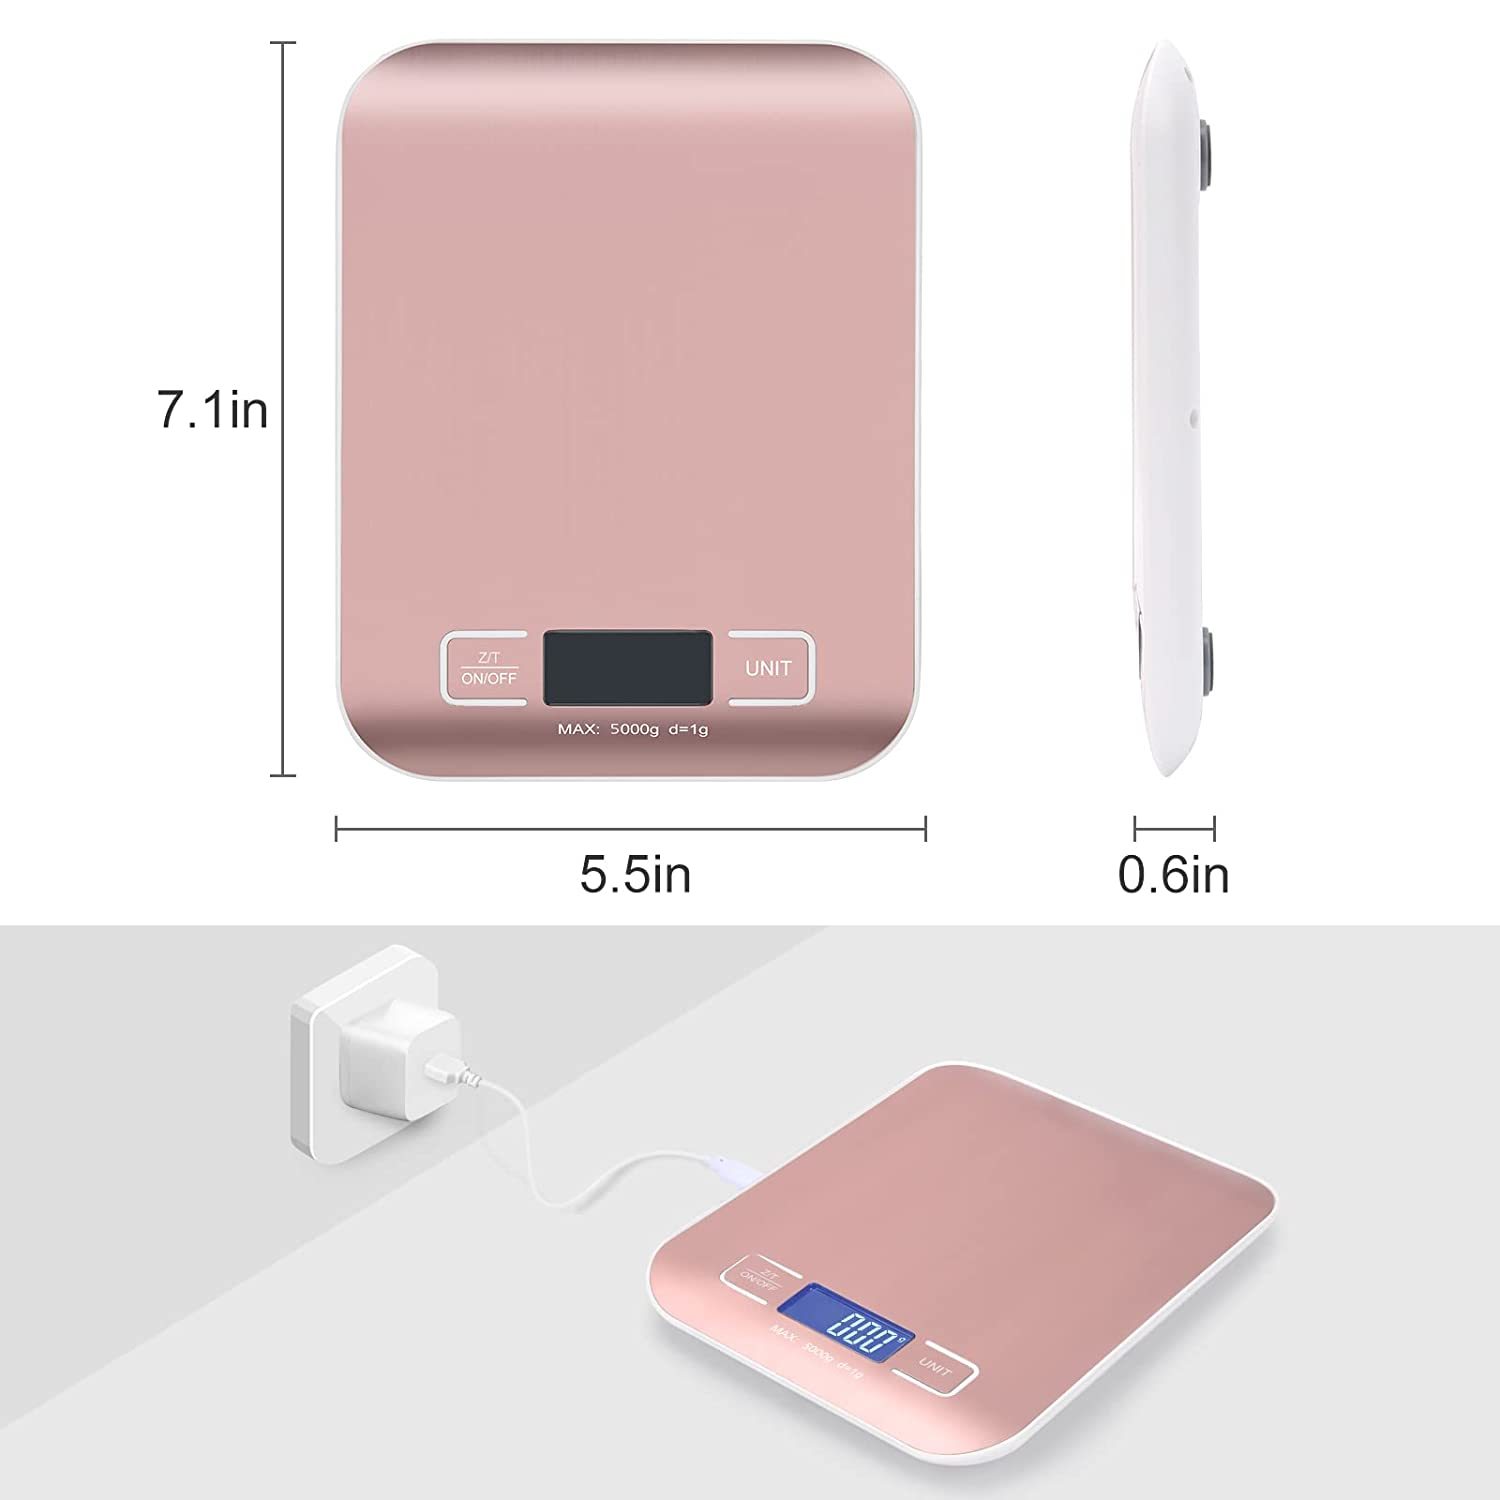 Digital Touch Pocket Scale 0.01oz - Tomiba 3000g Small Portable Electronic Precision Scale (0.1g) Resolution 2 AAA Batteries Included